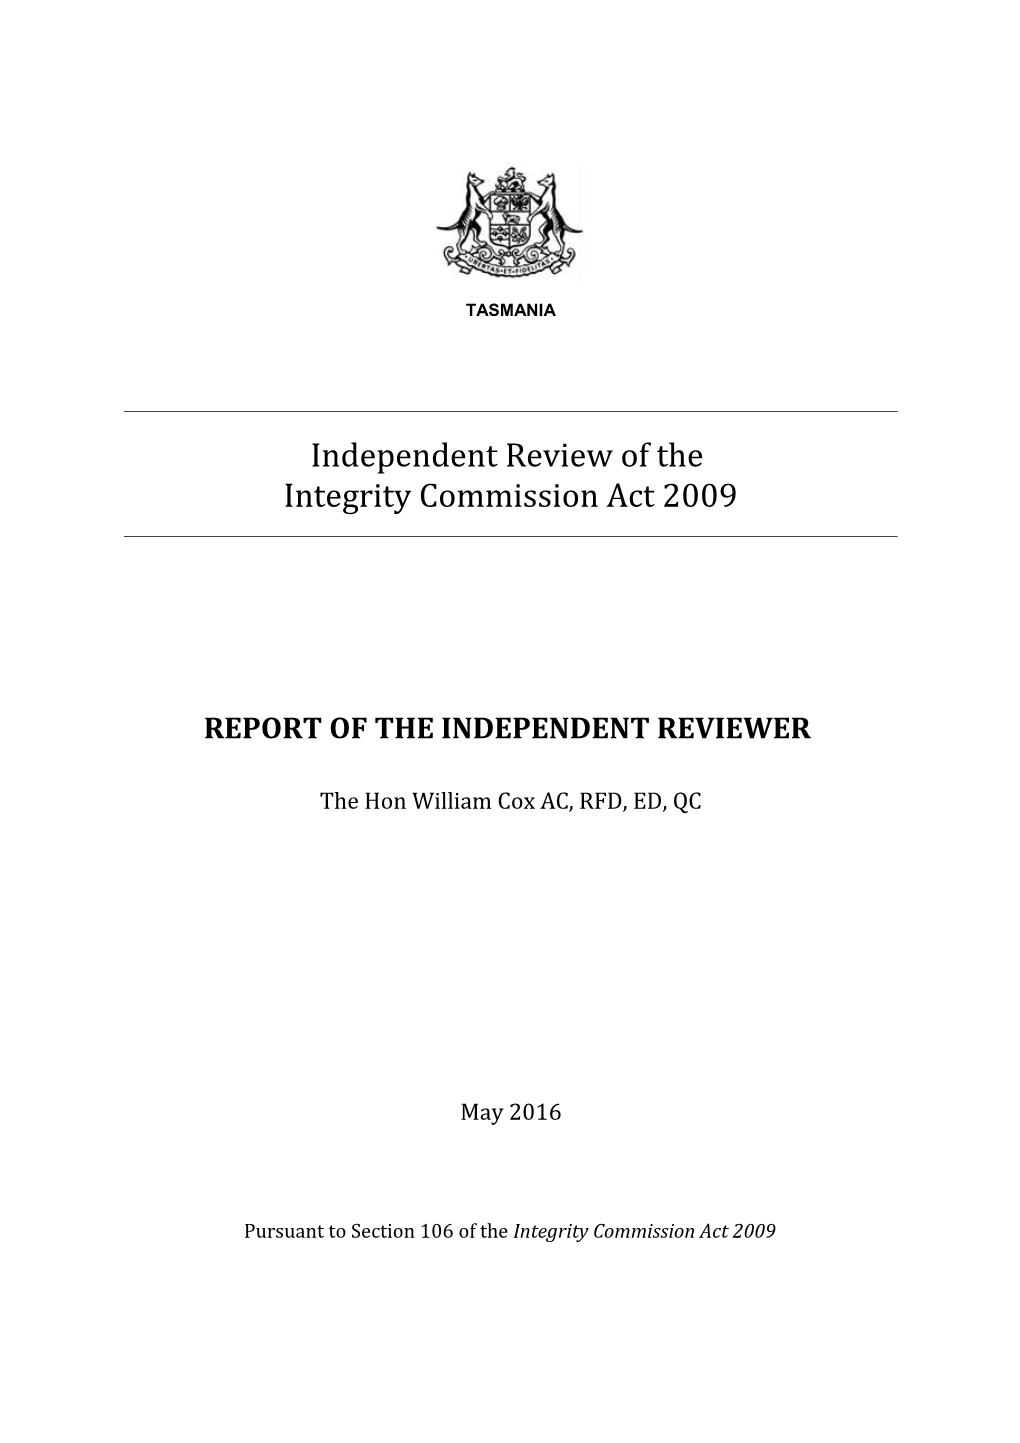 Independent Review of the Integrity Commission Act 2009